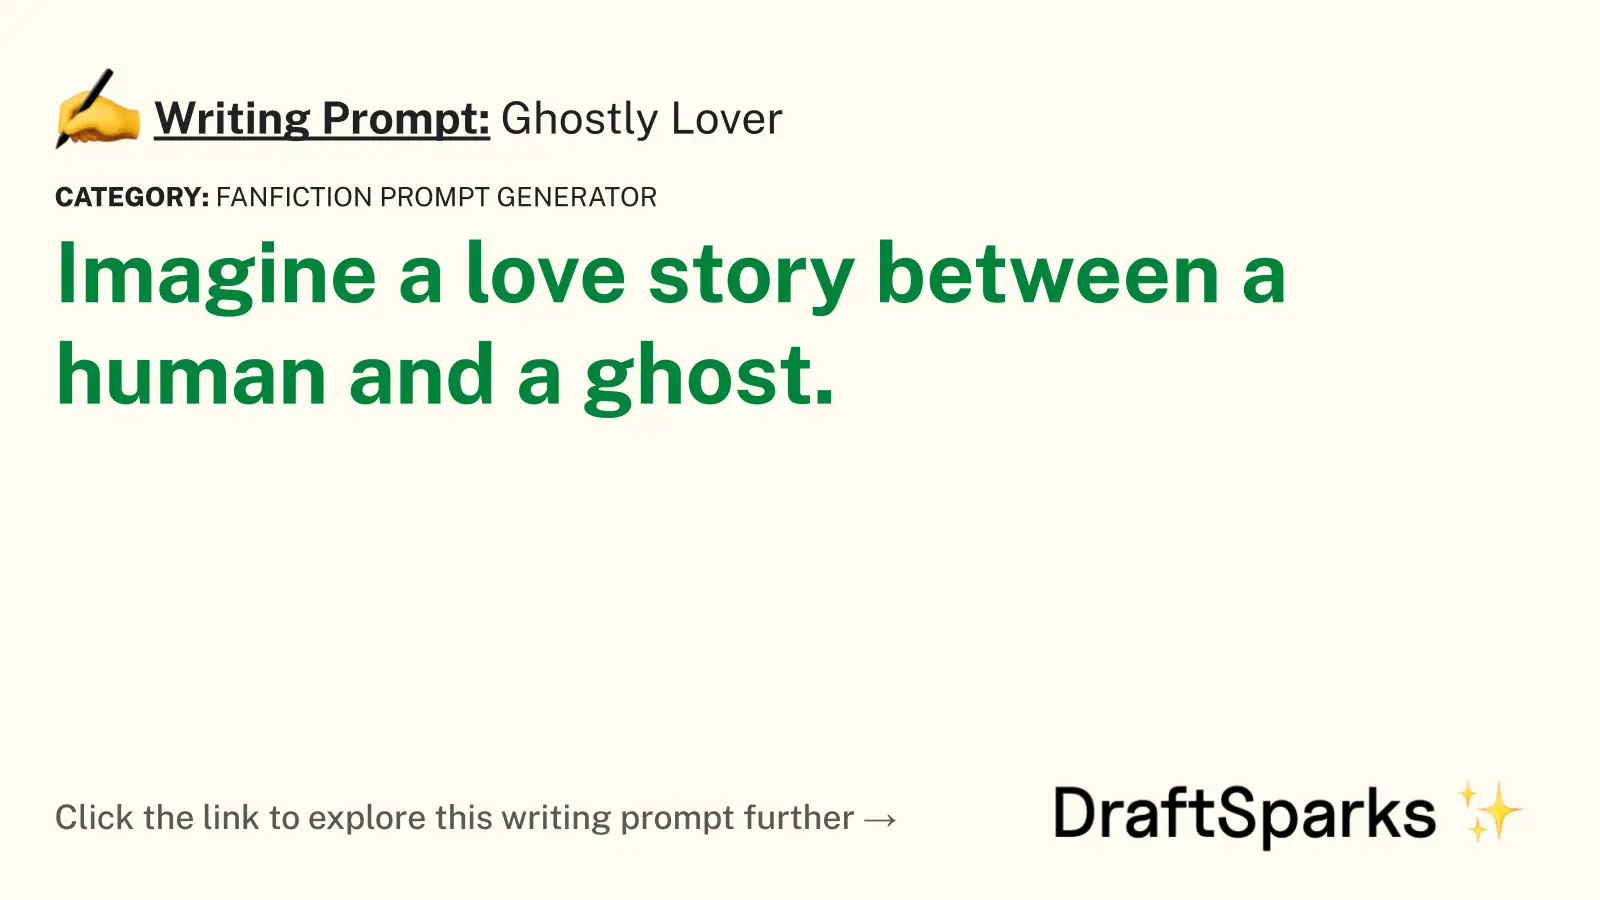 Ghostly Lover